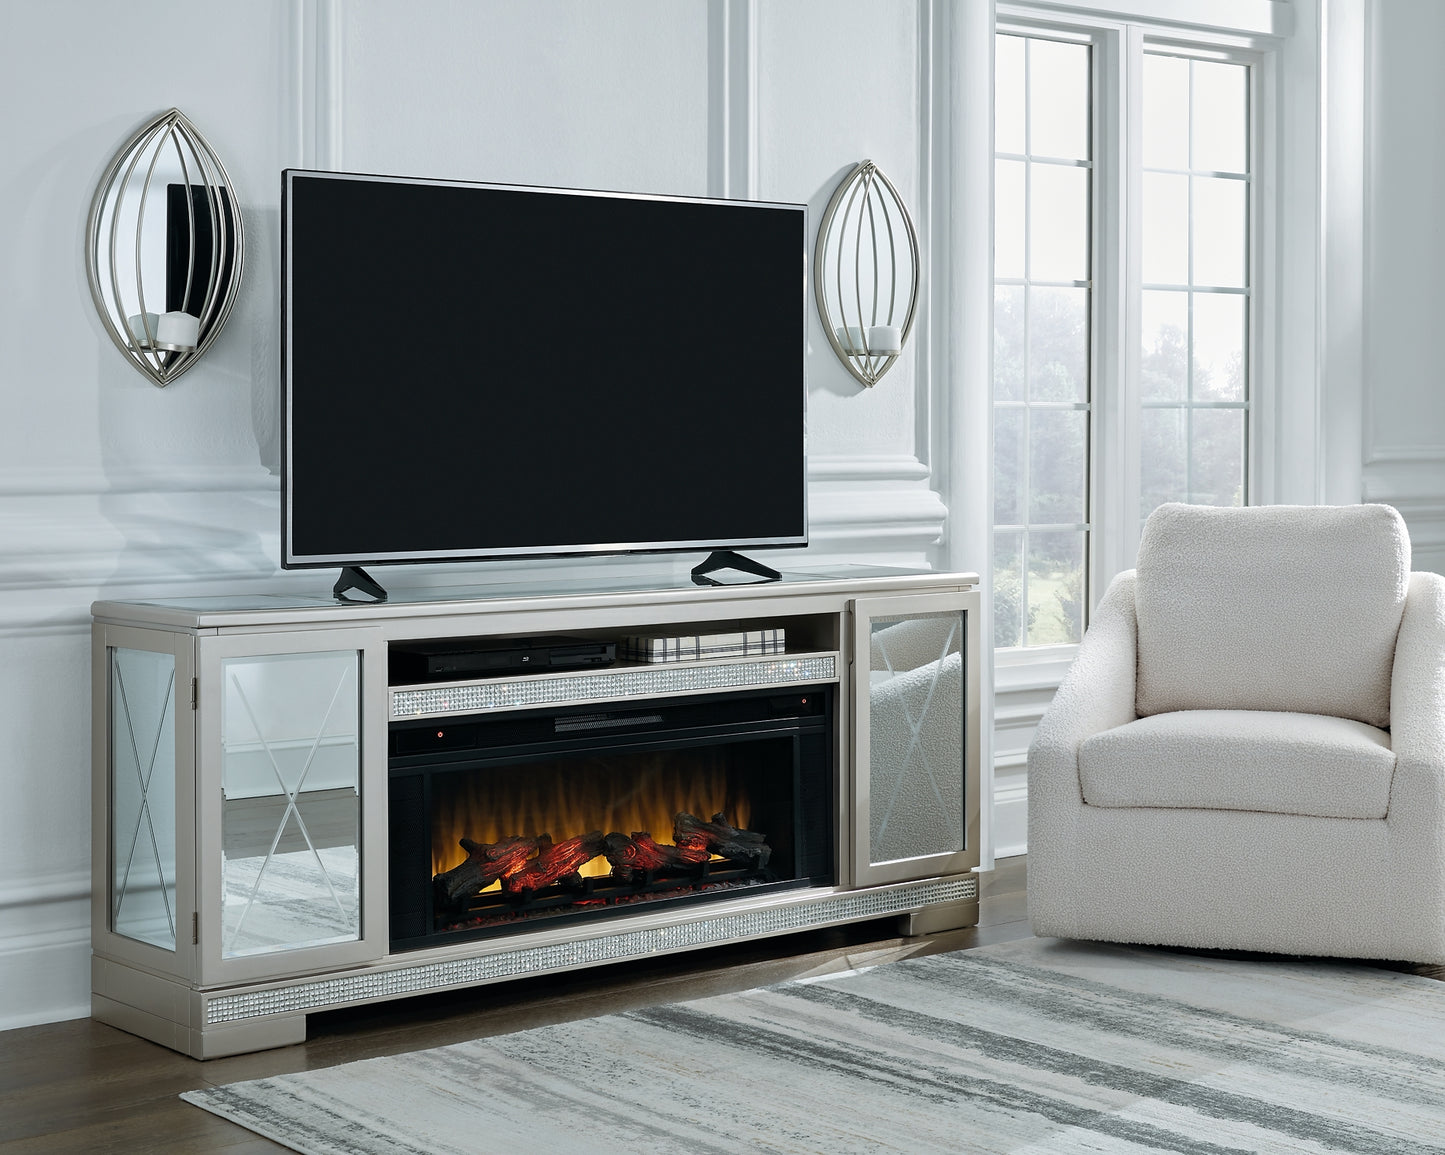 Flamory LG TV Stand w/Fireplace Option Wilson Furniture (OH)  in Bridgeport, Ohio. Serving Bridgeport, Yorkville, Bellaire, & Avondale